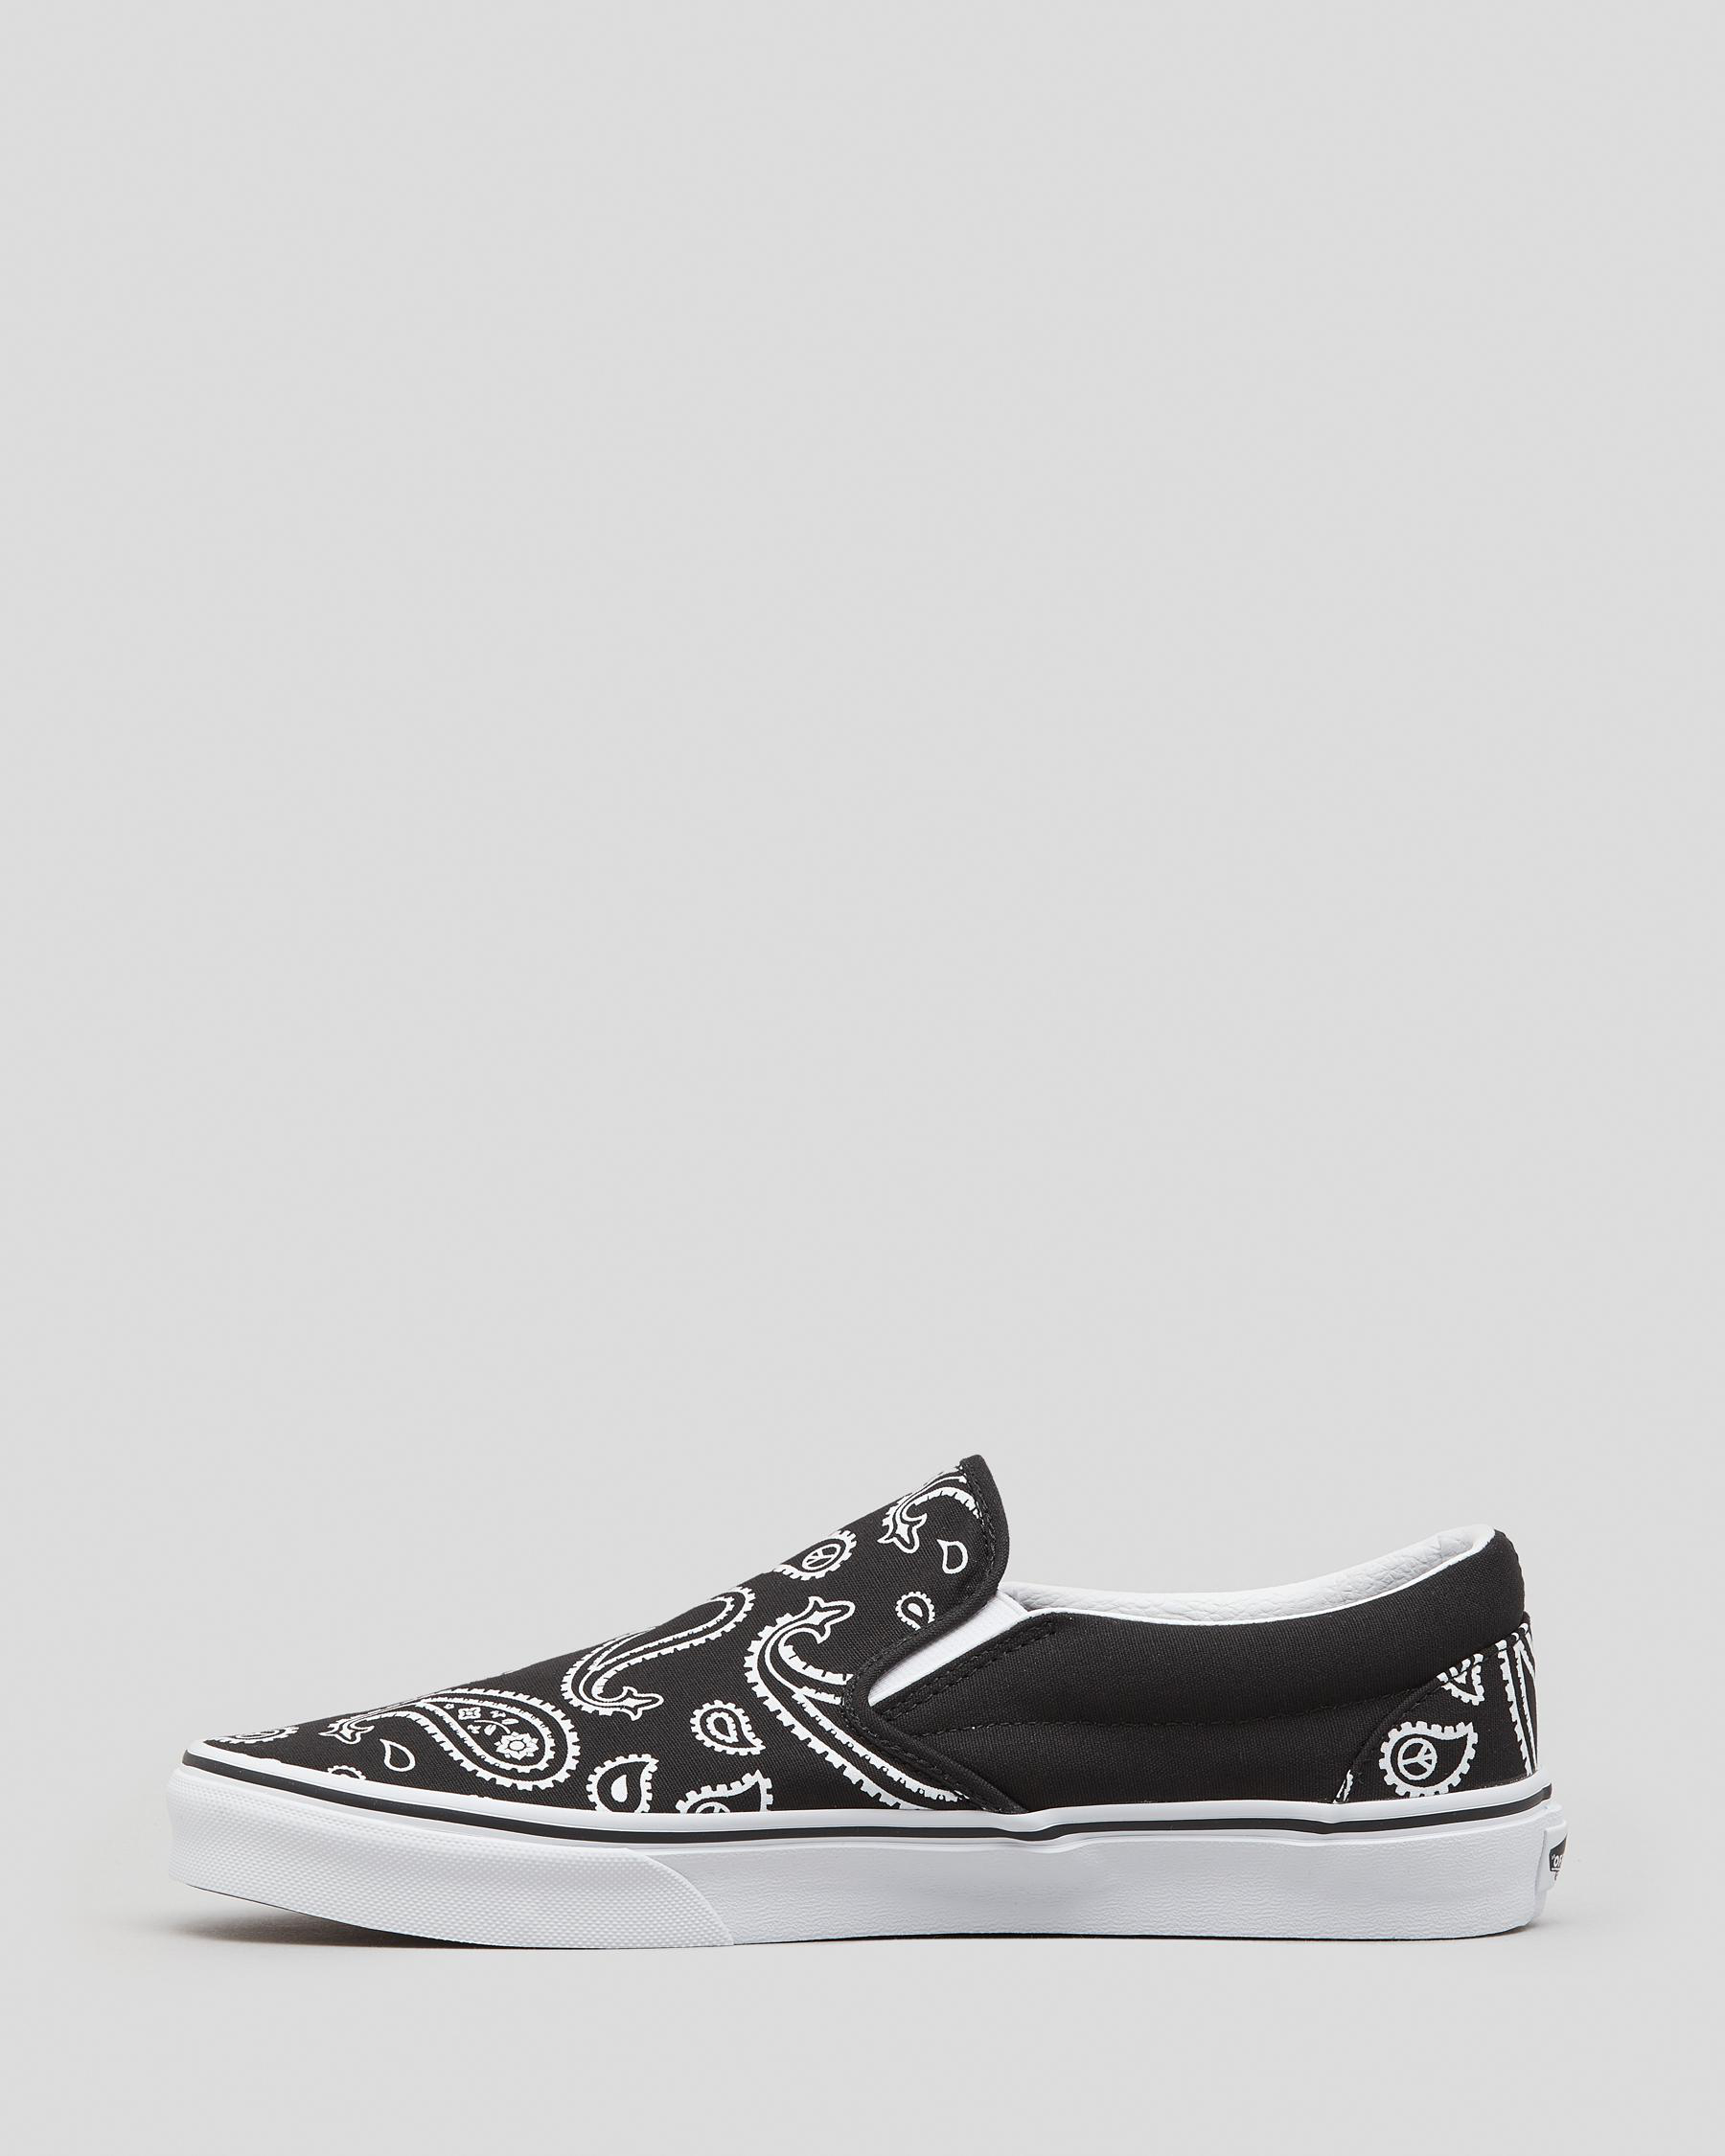 Vans Classic Slip-On Shoes In Black/true White - Fast Shipping & Easy ...